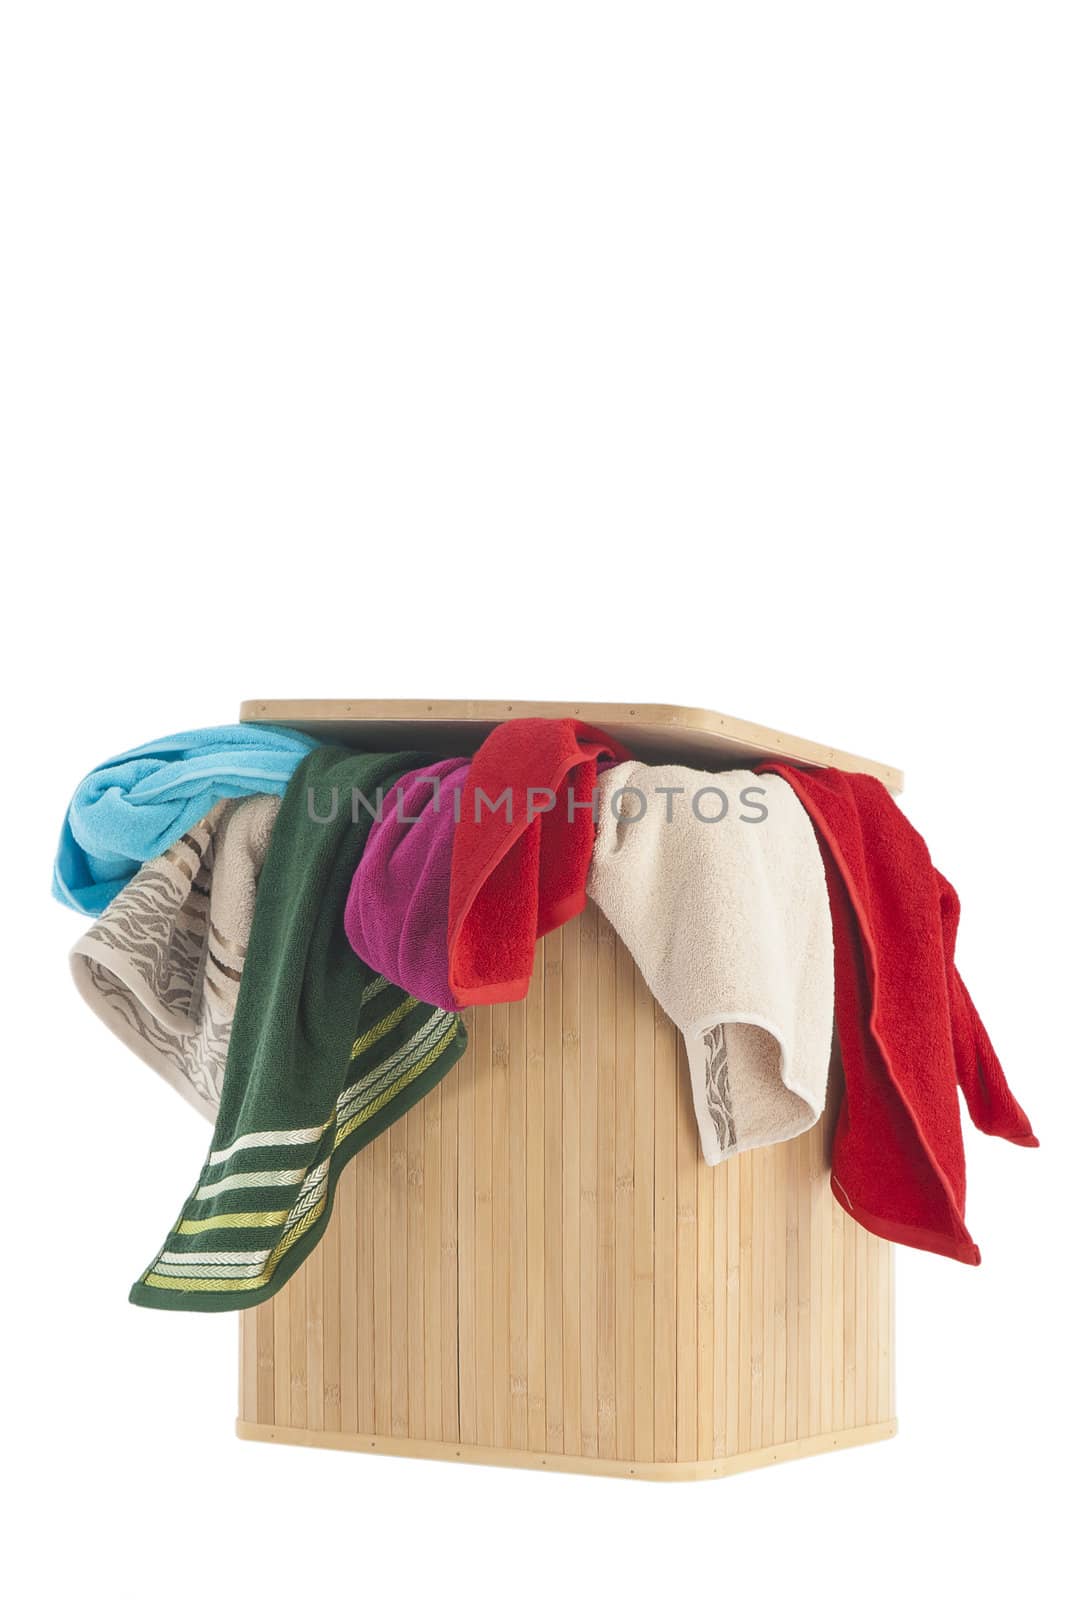 colorful towels in a basket isolated on white background 